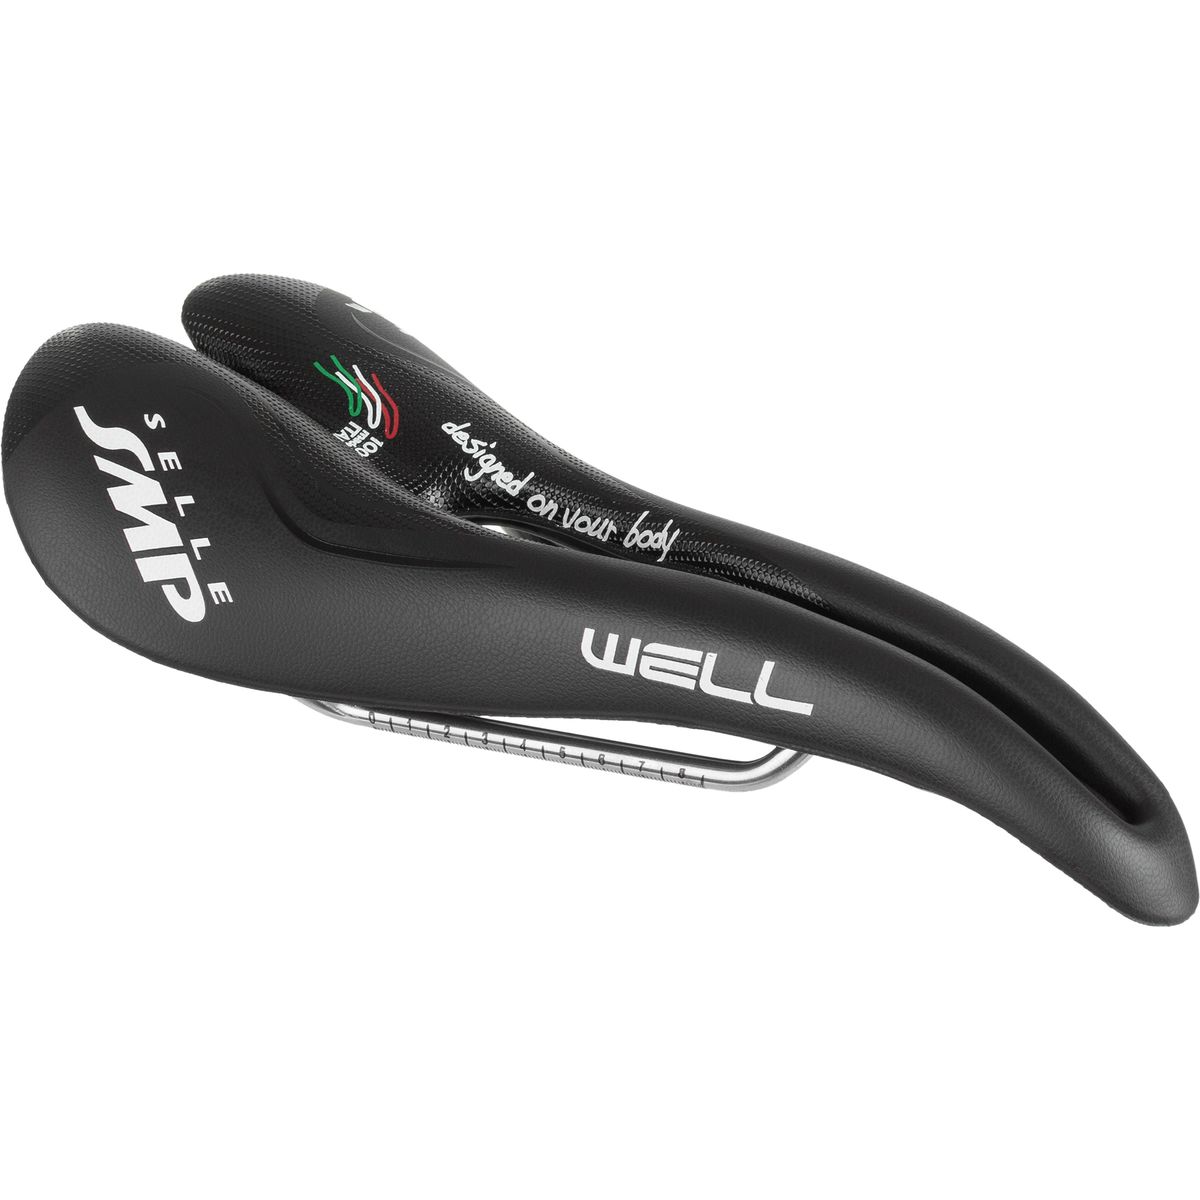 Selle SMP Well Saddle